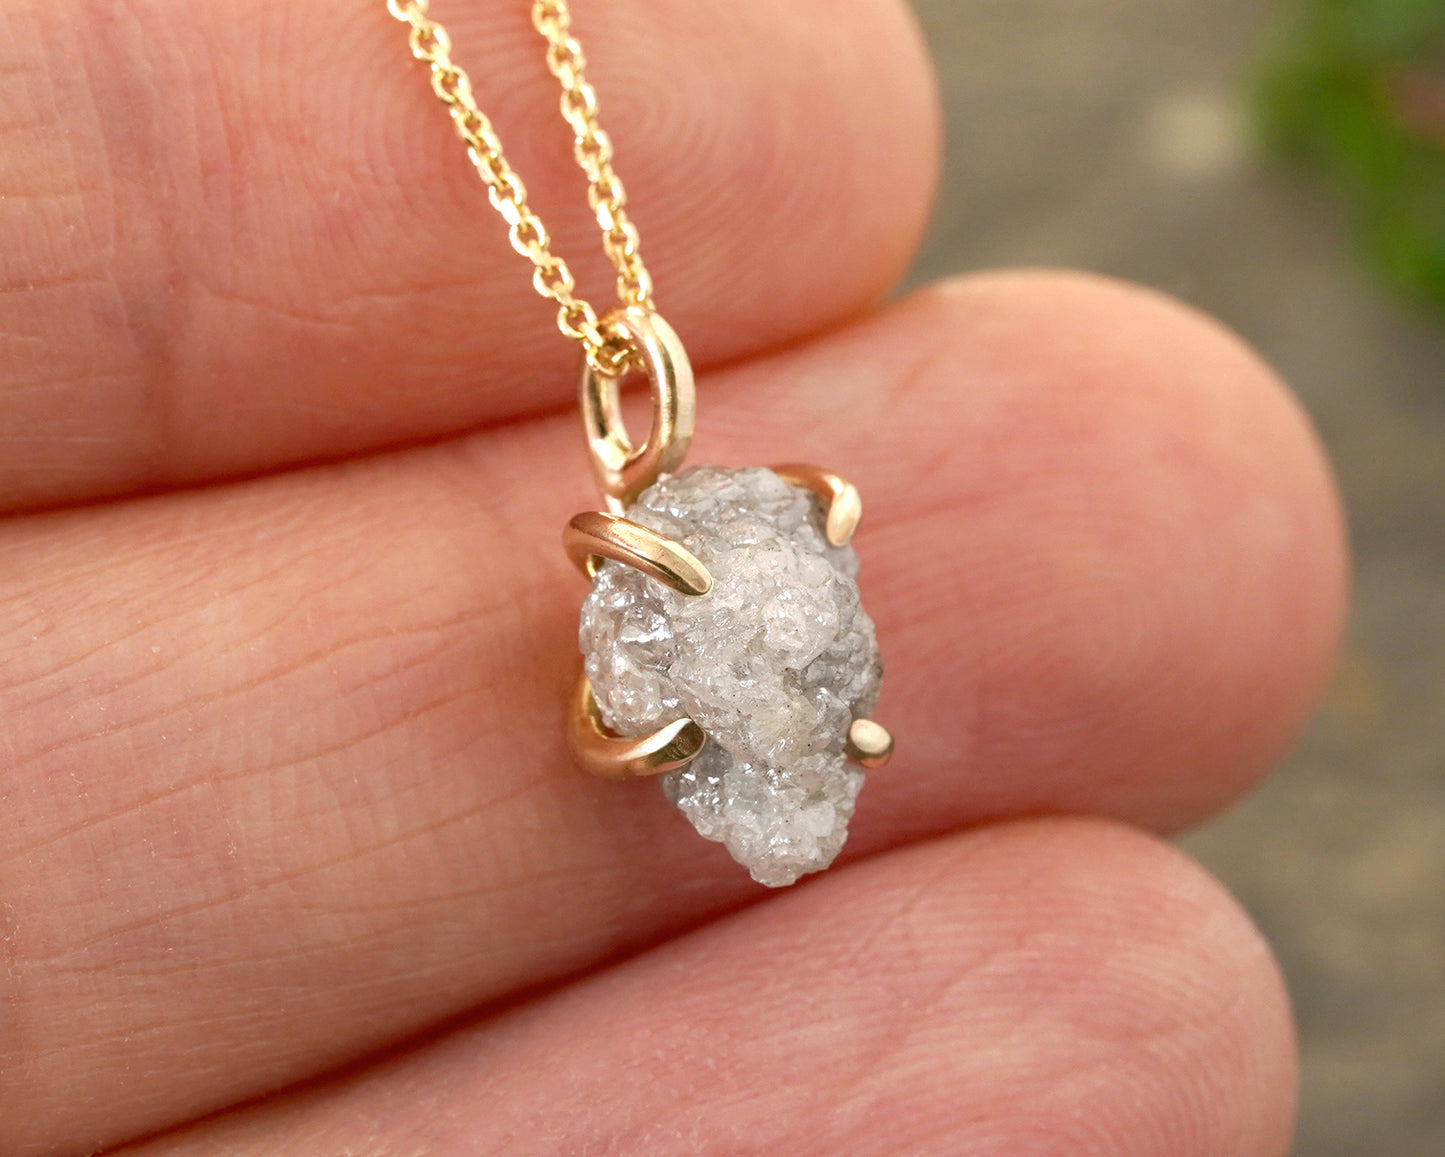 3ct Rough Diamond Necklace in 14k Yellow Gold